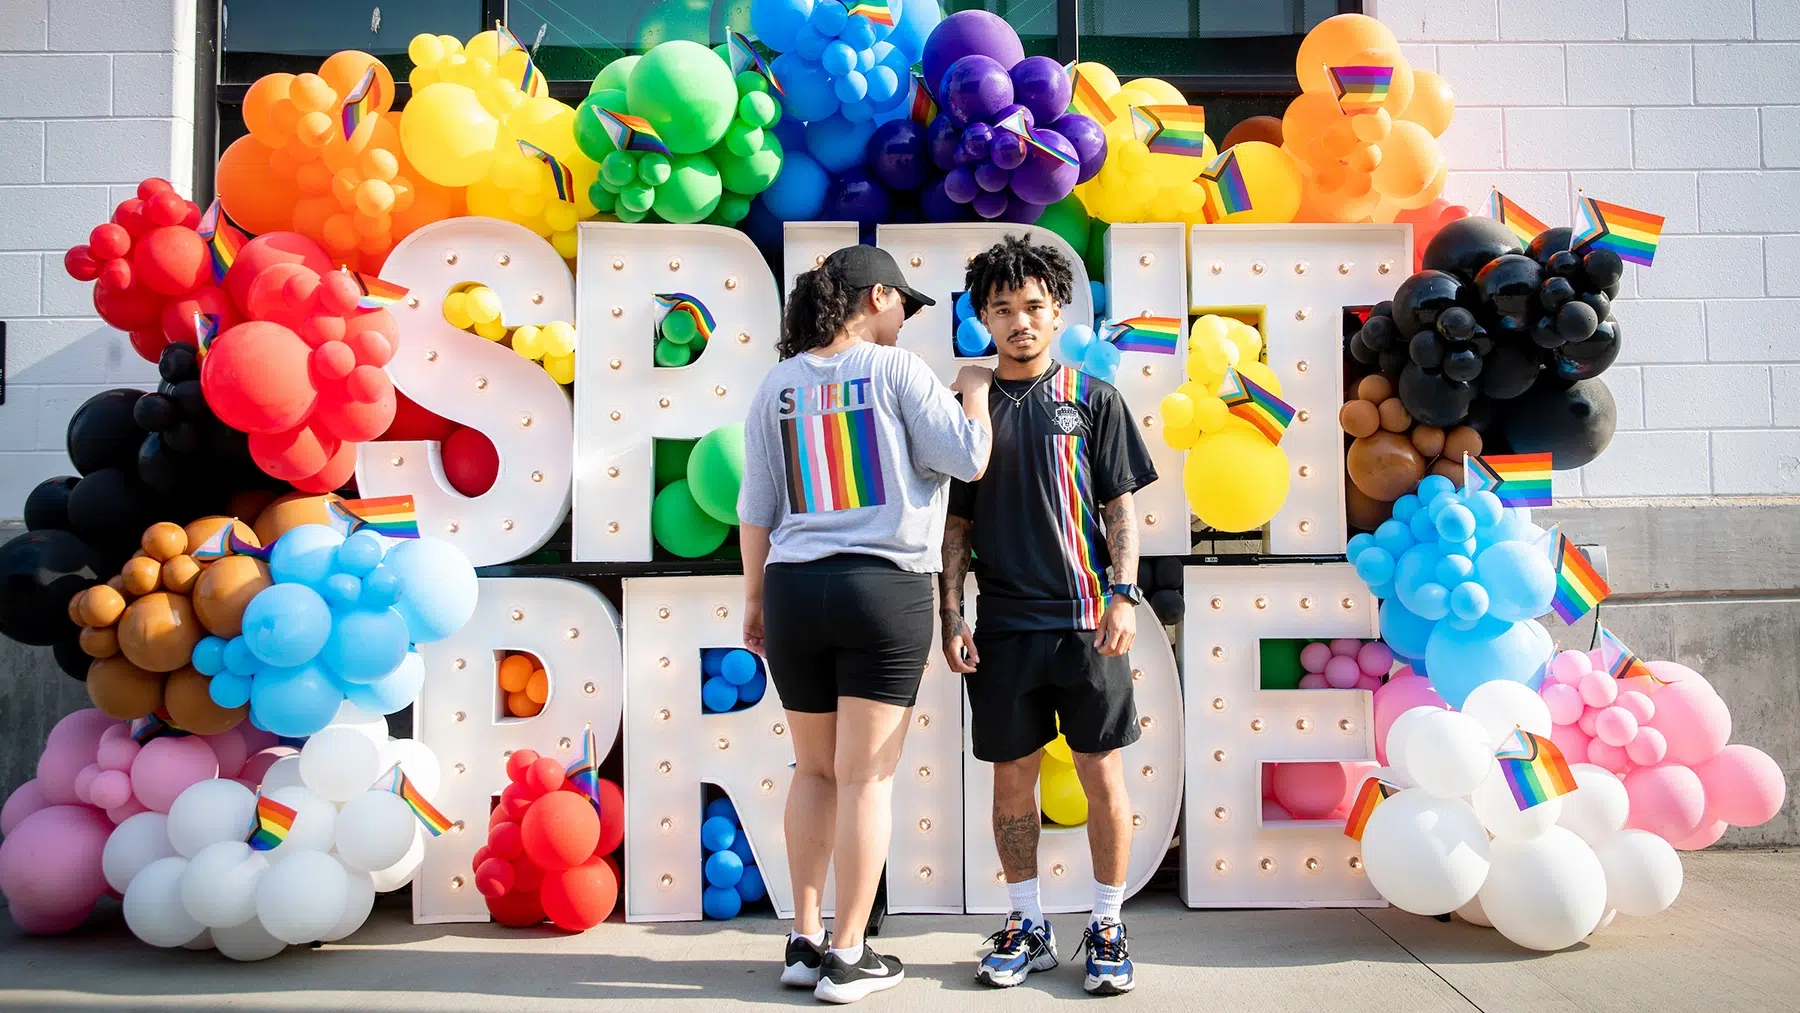 Two people stand in front of marquee letter spelling out "SPIRIT PRIDE" with colorful balloons.